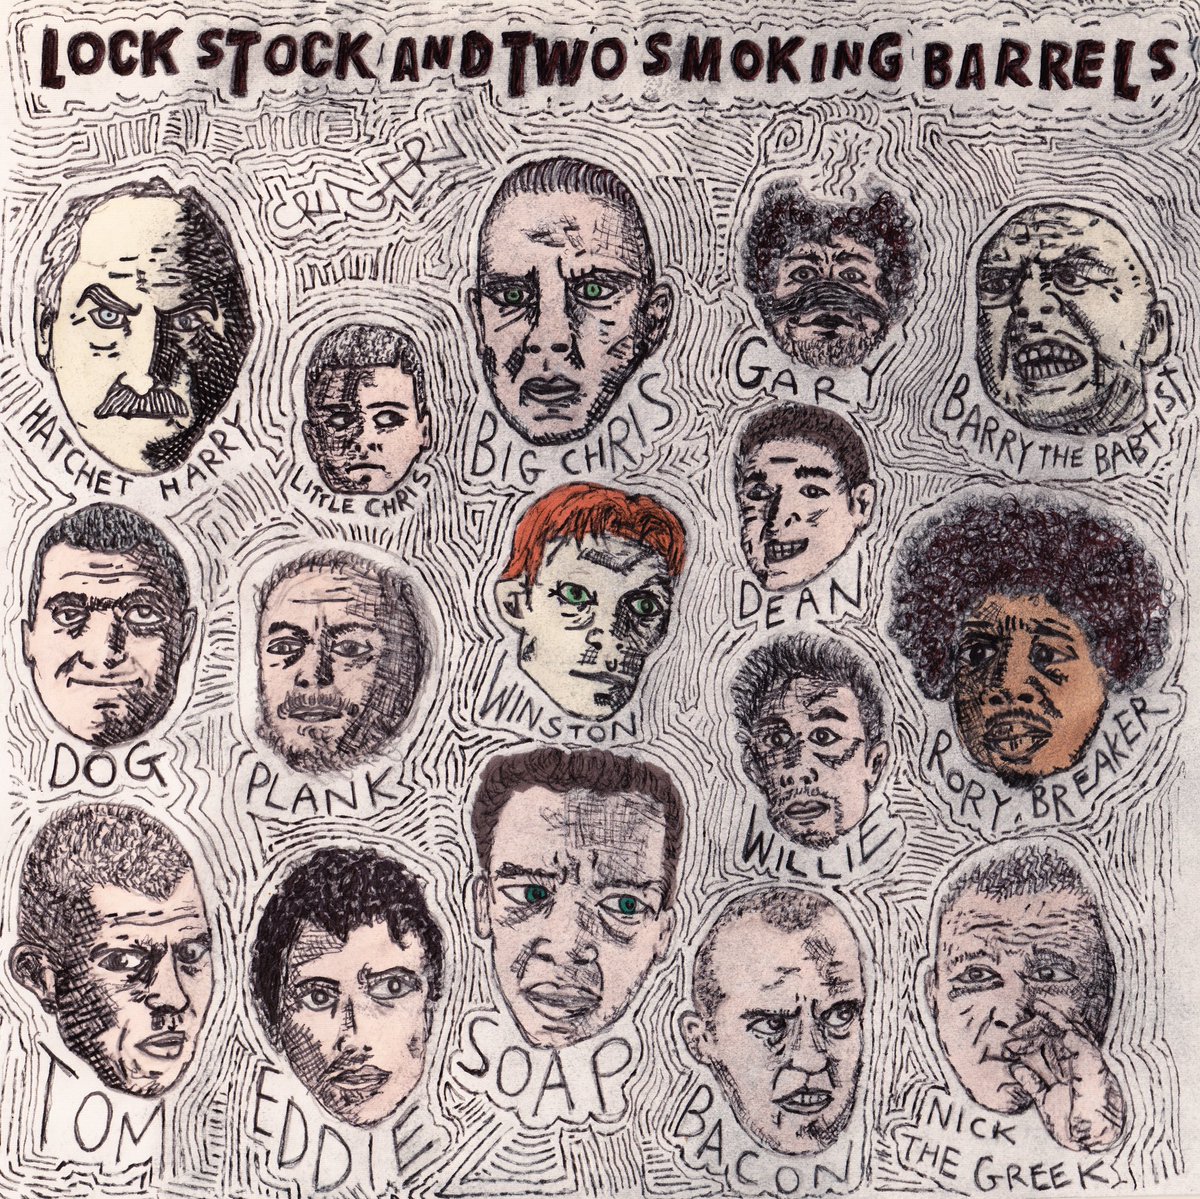 My Top 10 Films Illustrated 10. Lock, Stock & Two Smoking Barrels (1998)